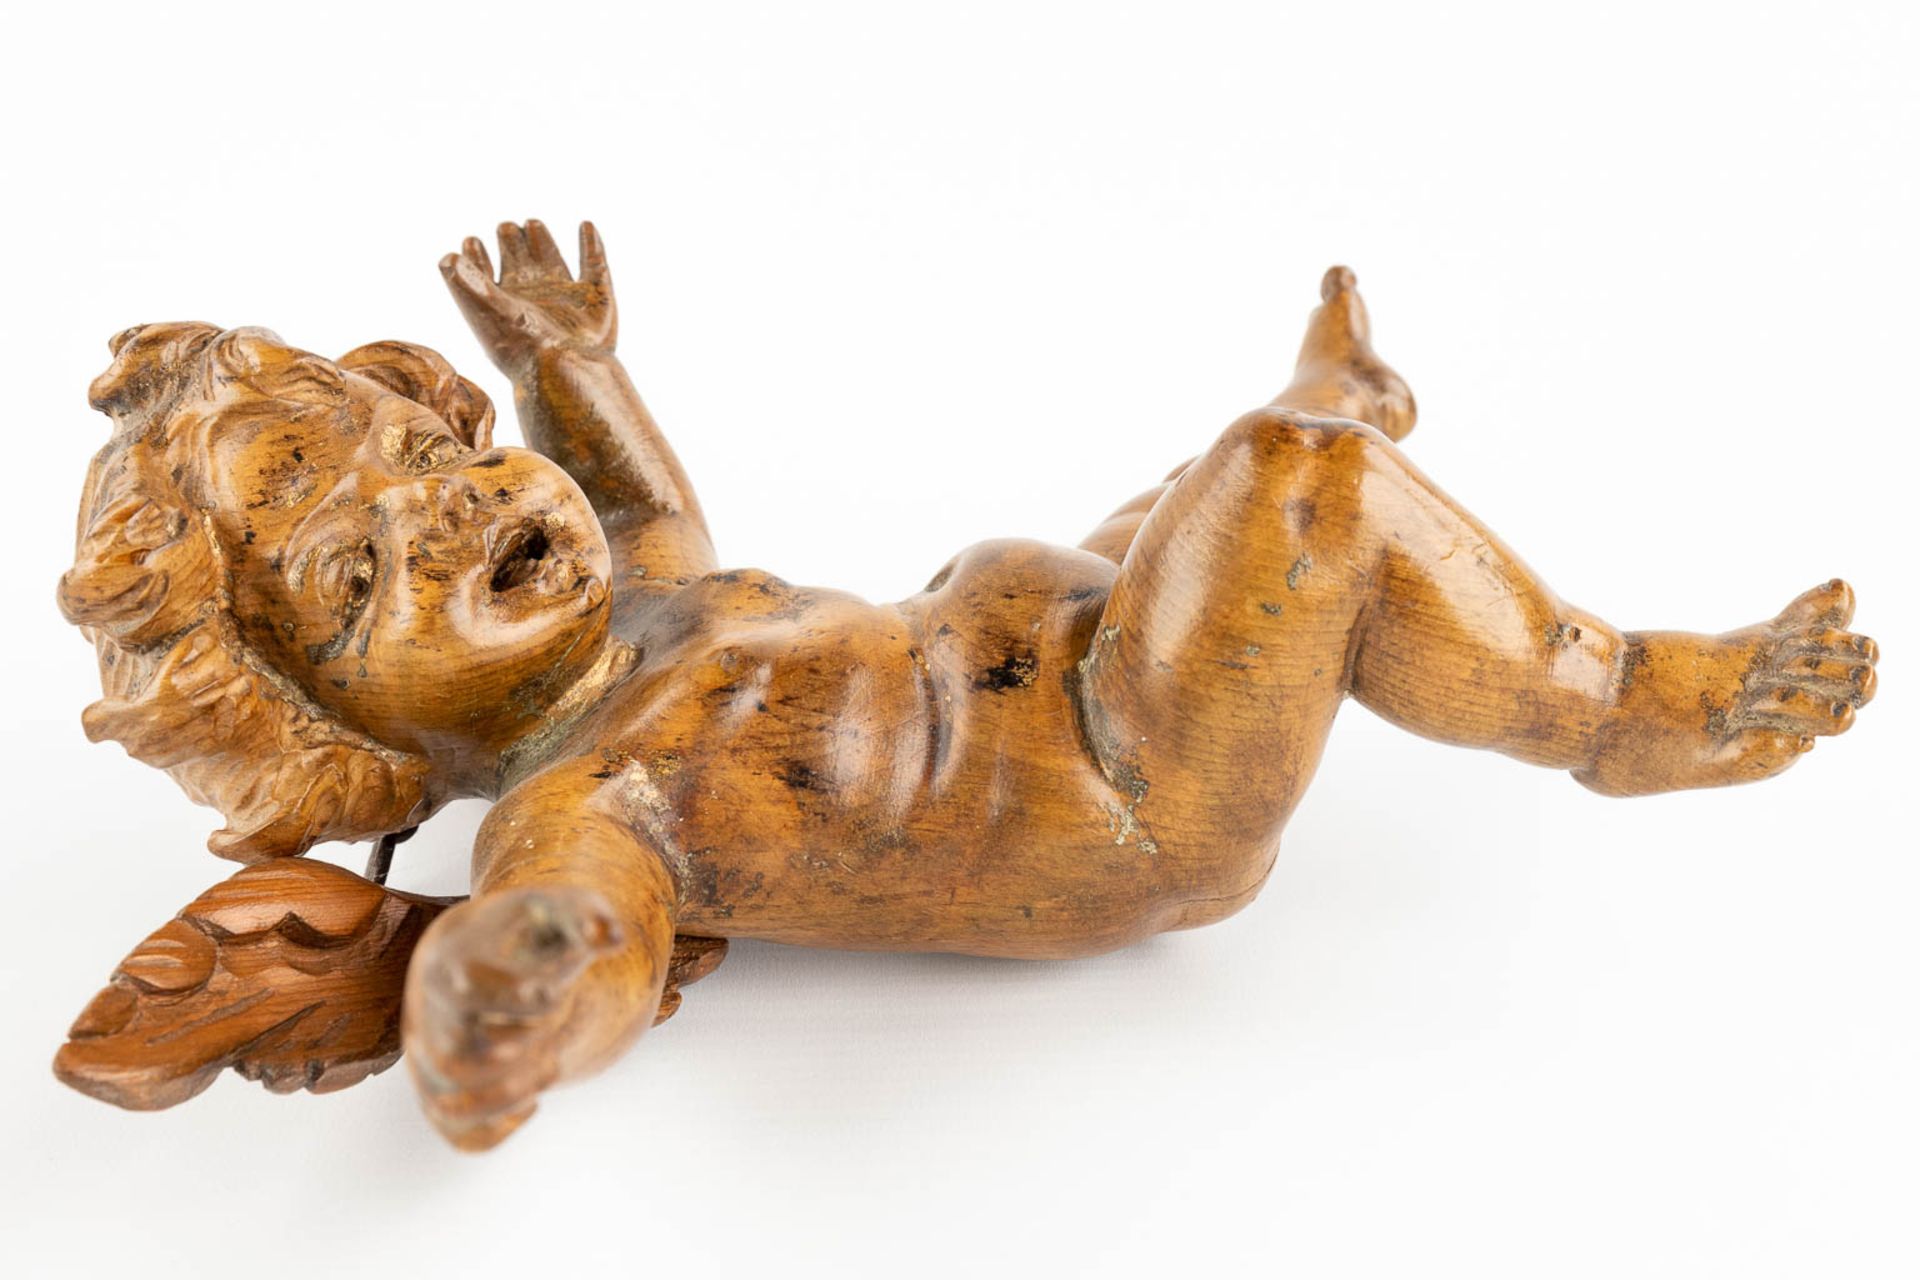 A pair of wood-sculptured putti, basswood, 18th C. (W:22 x H:30 cm) - Image 11 of 14